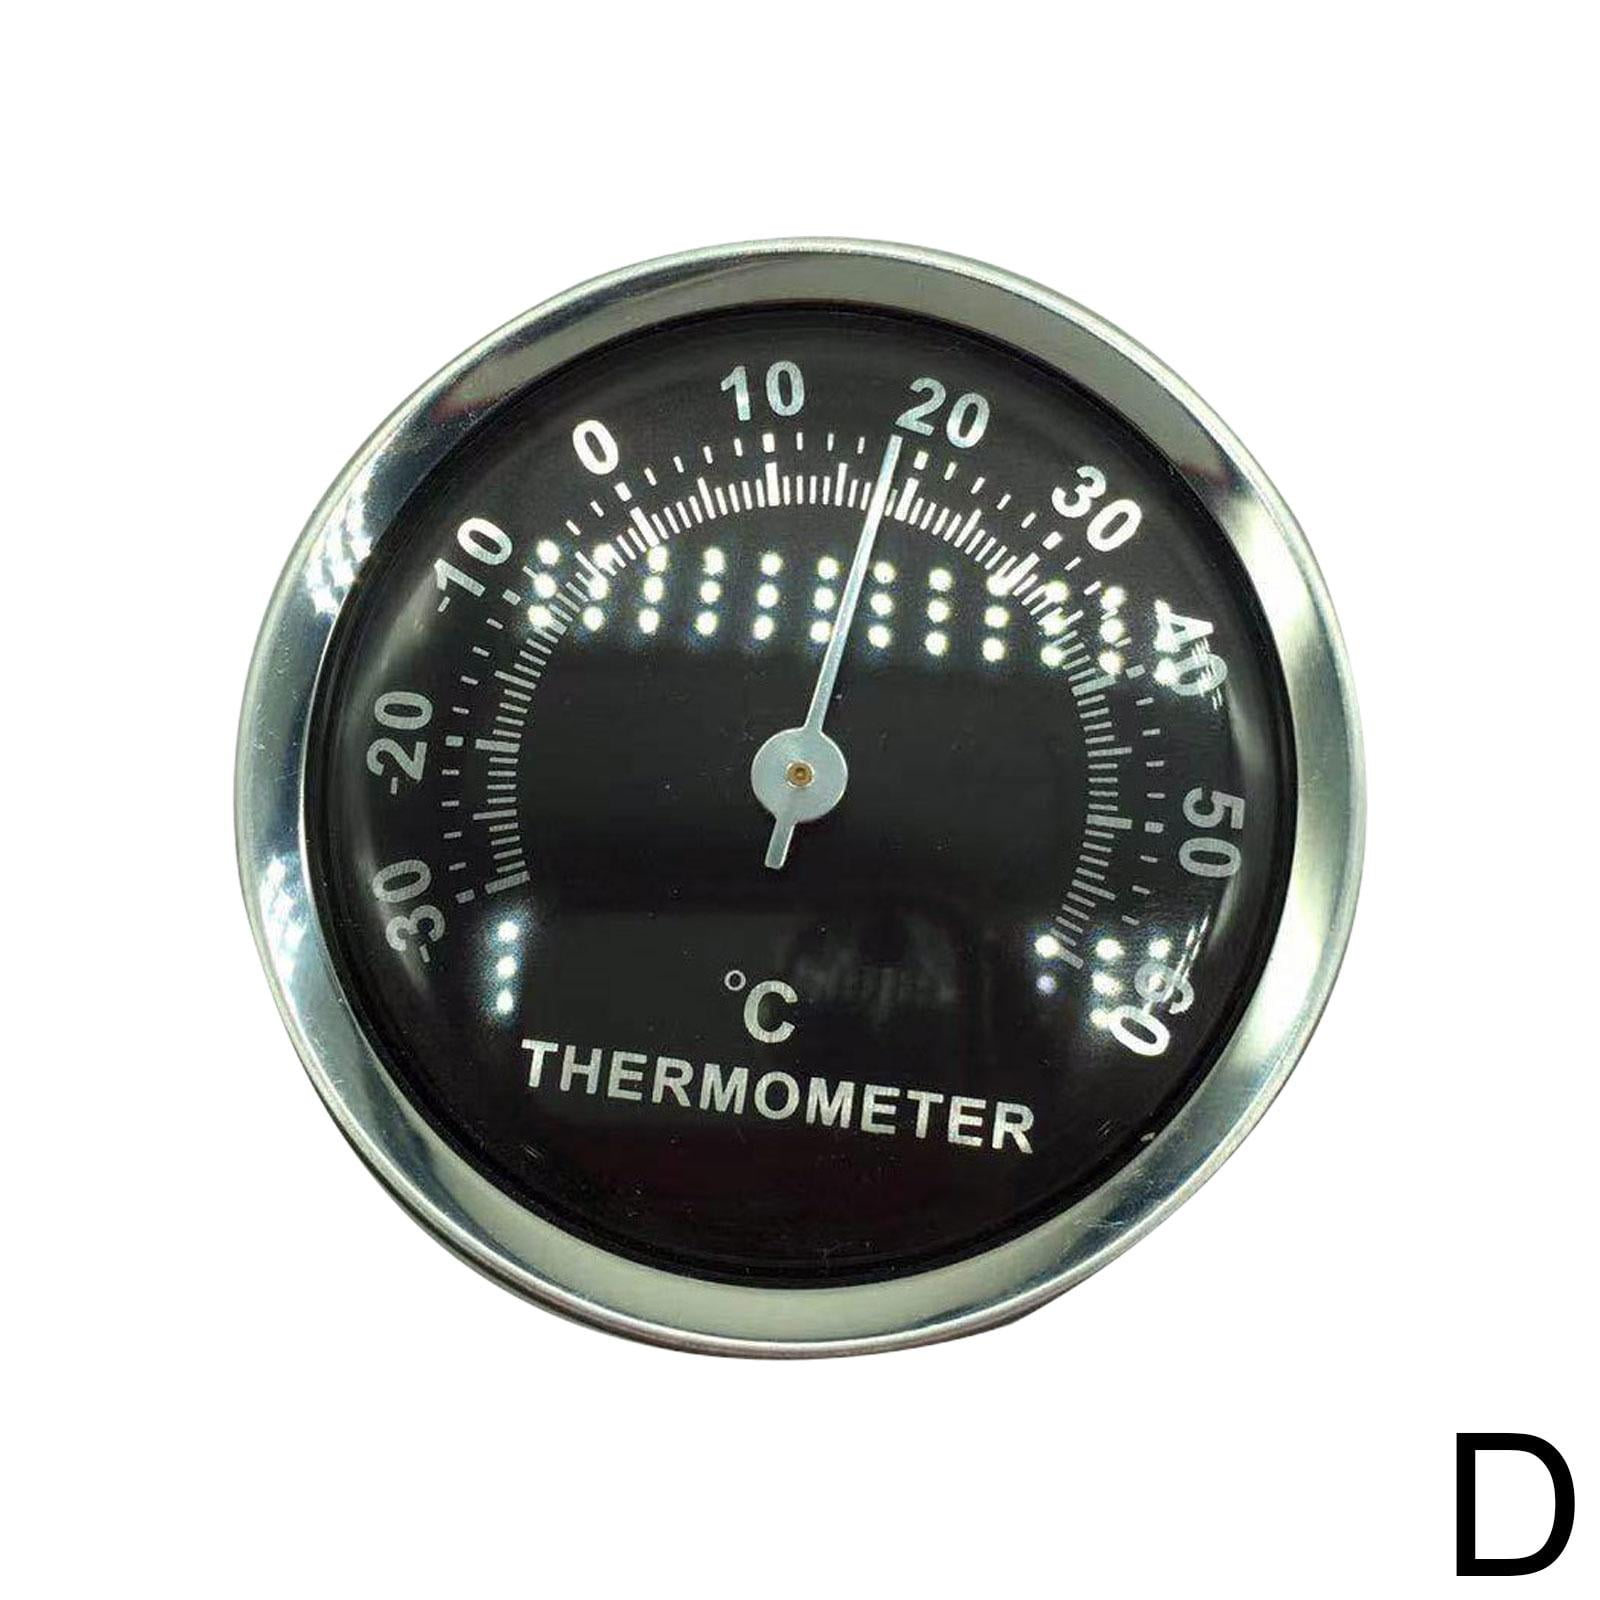 X37E Convenient Indoor Thermometer Hygrometer Portable Analog Temperature  Humidity Gauge for Home Room Outdoor Office